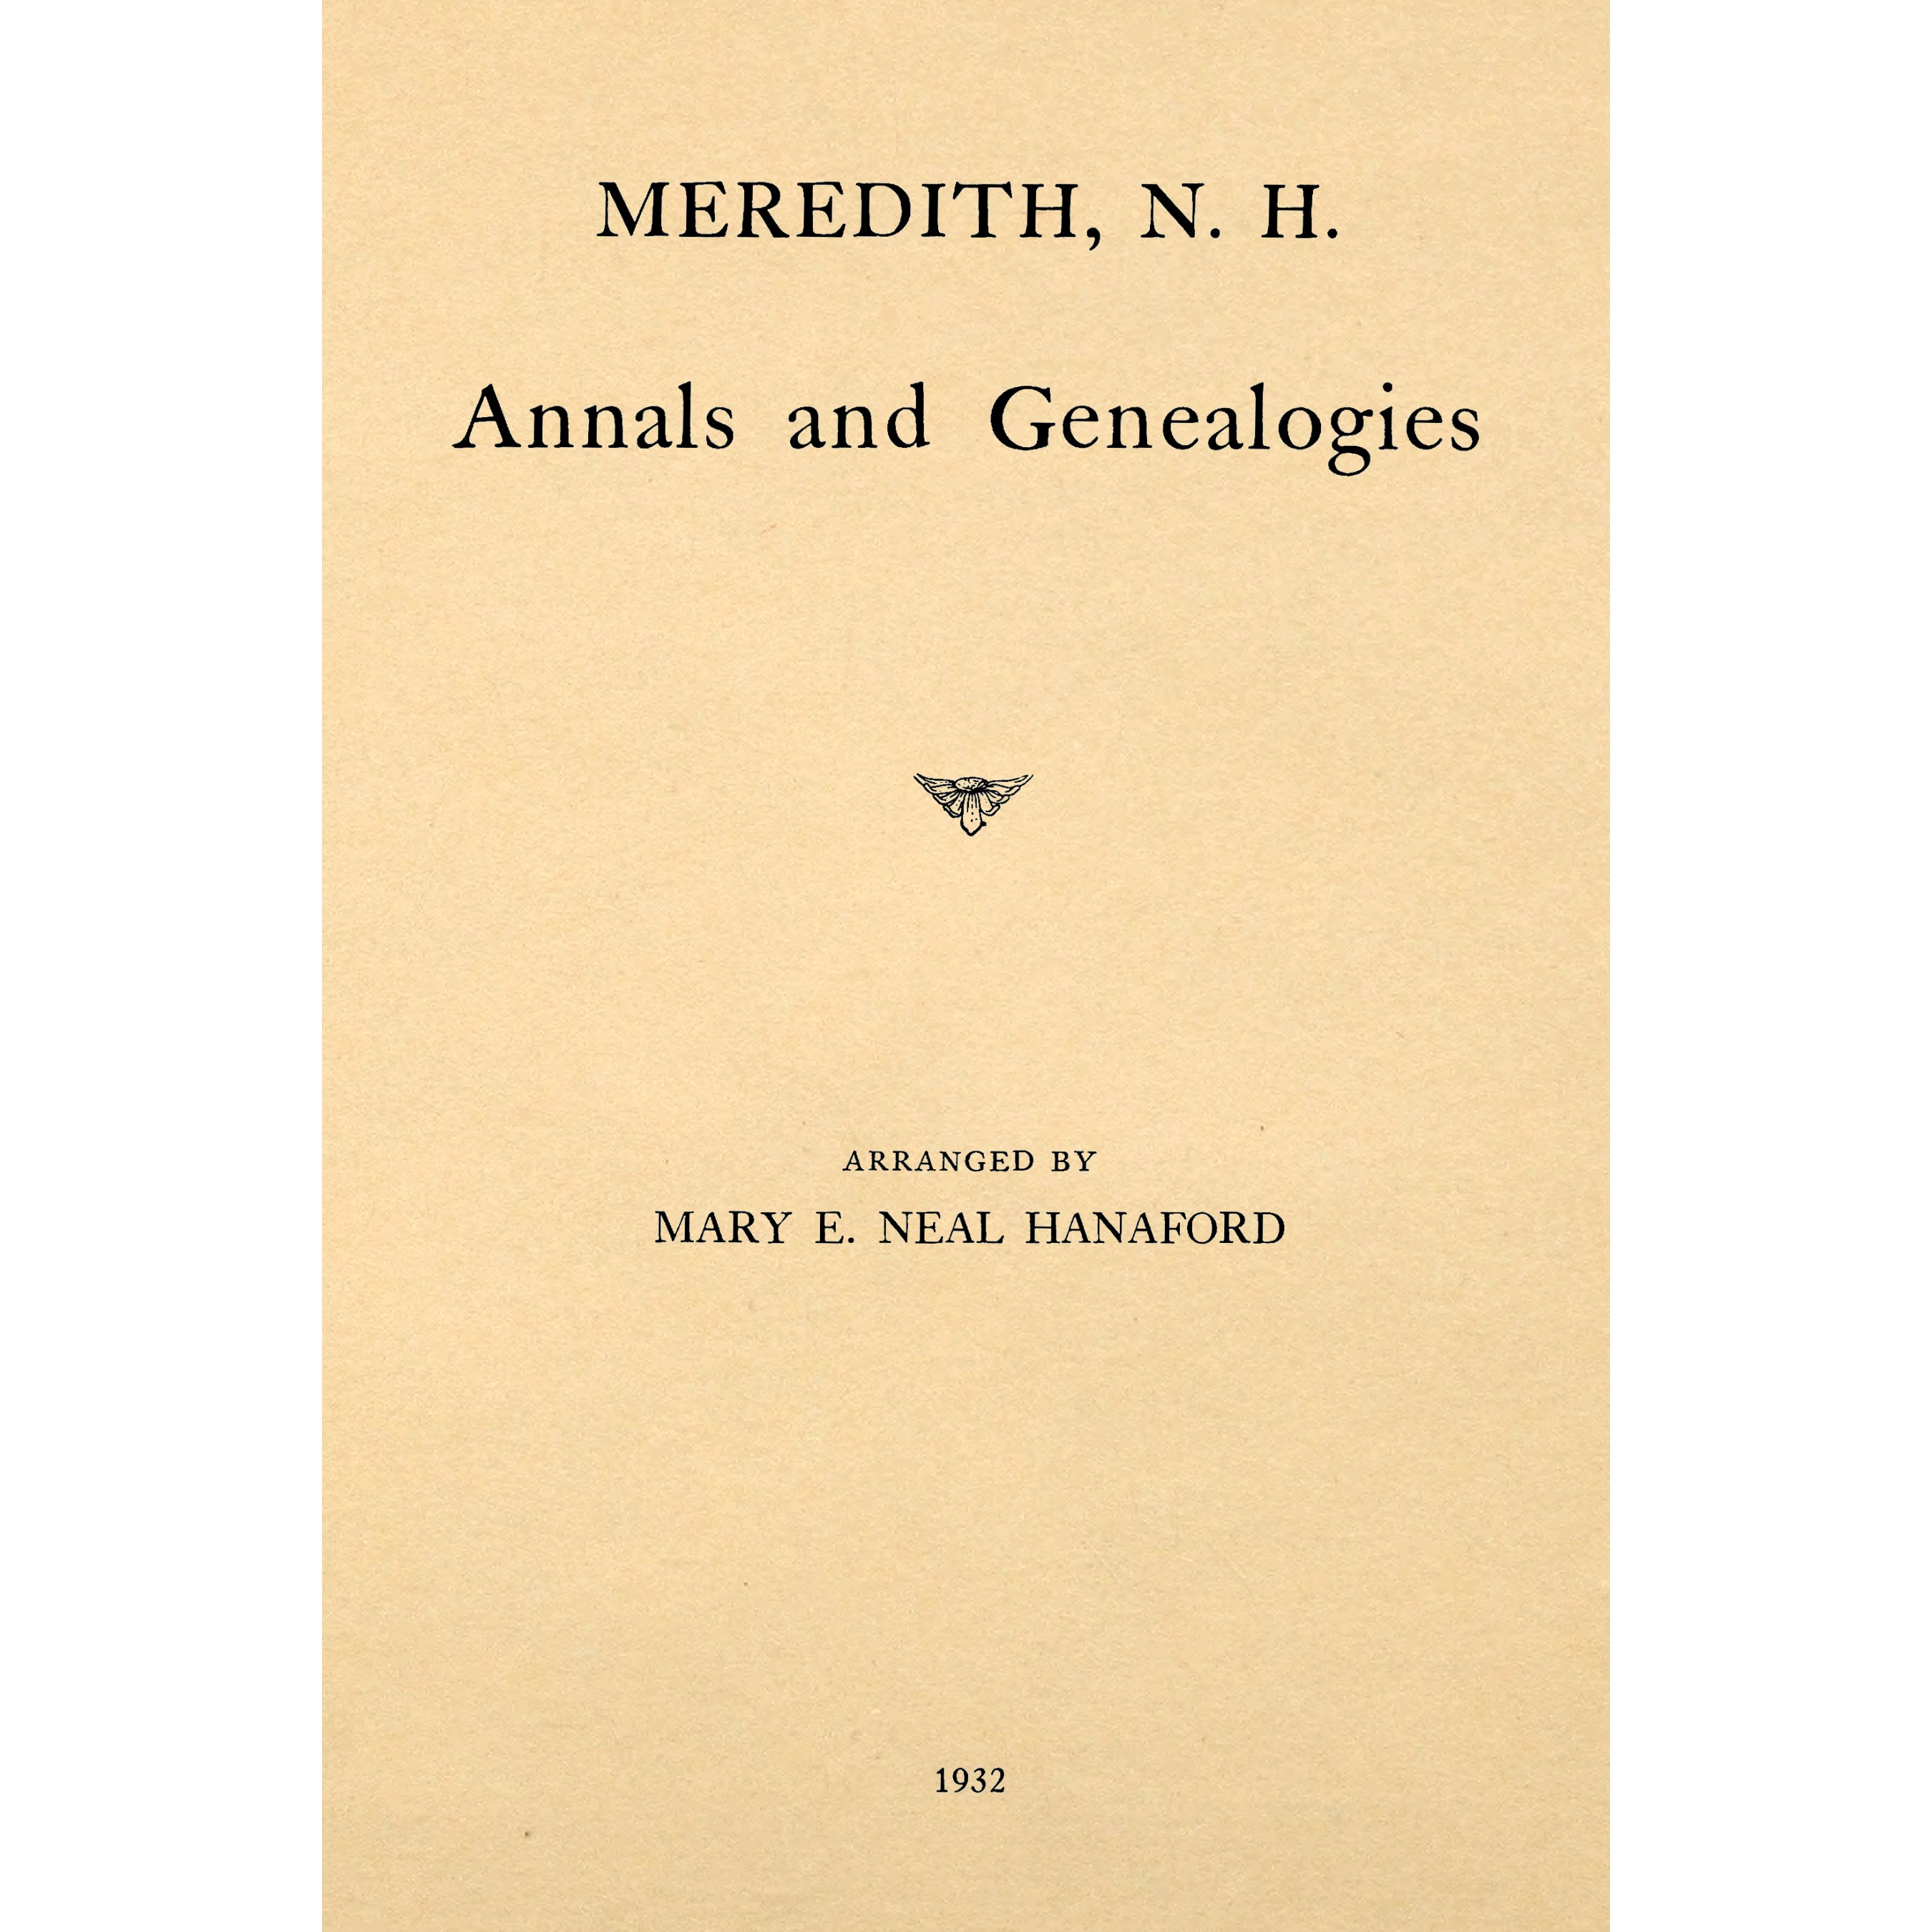 Meredith, N.H. : annals and genealogies